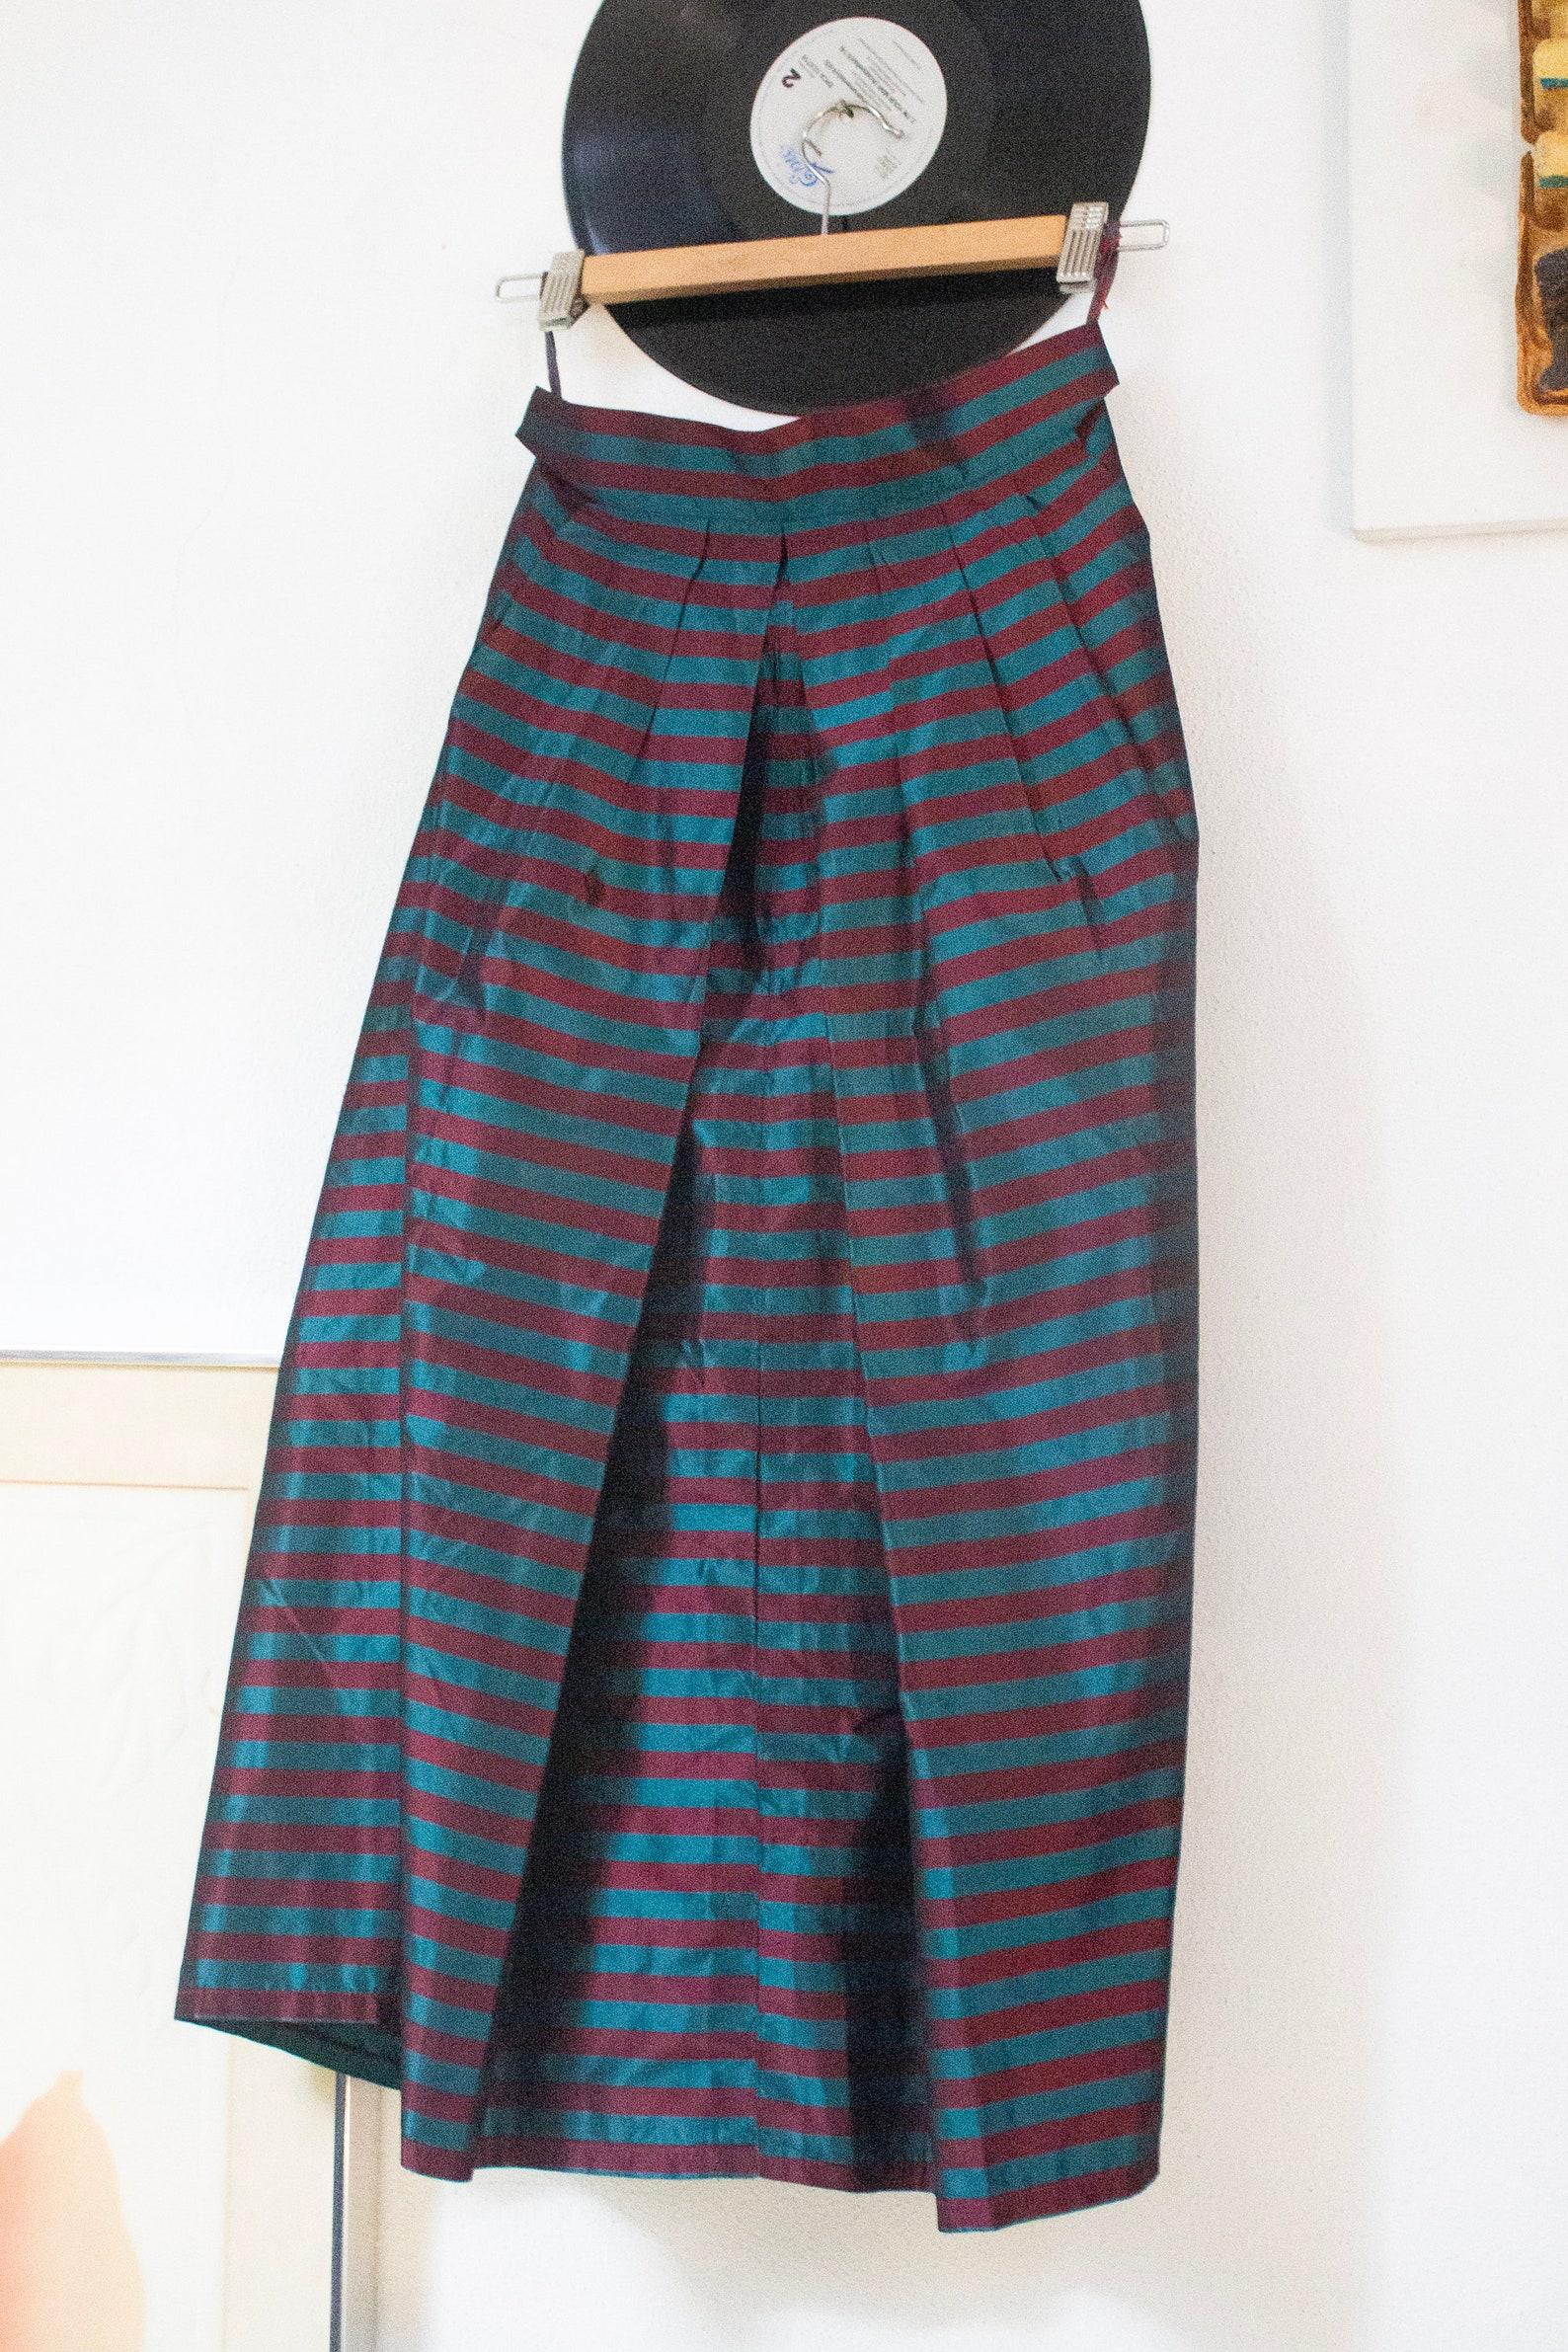 Saint Laurent Rive Gauche f/w 1982 blue and red striped taffeta pleated skirt In Good Condition For Sale In Milano, IT